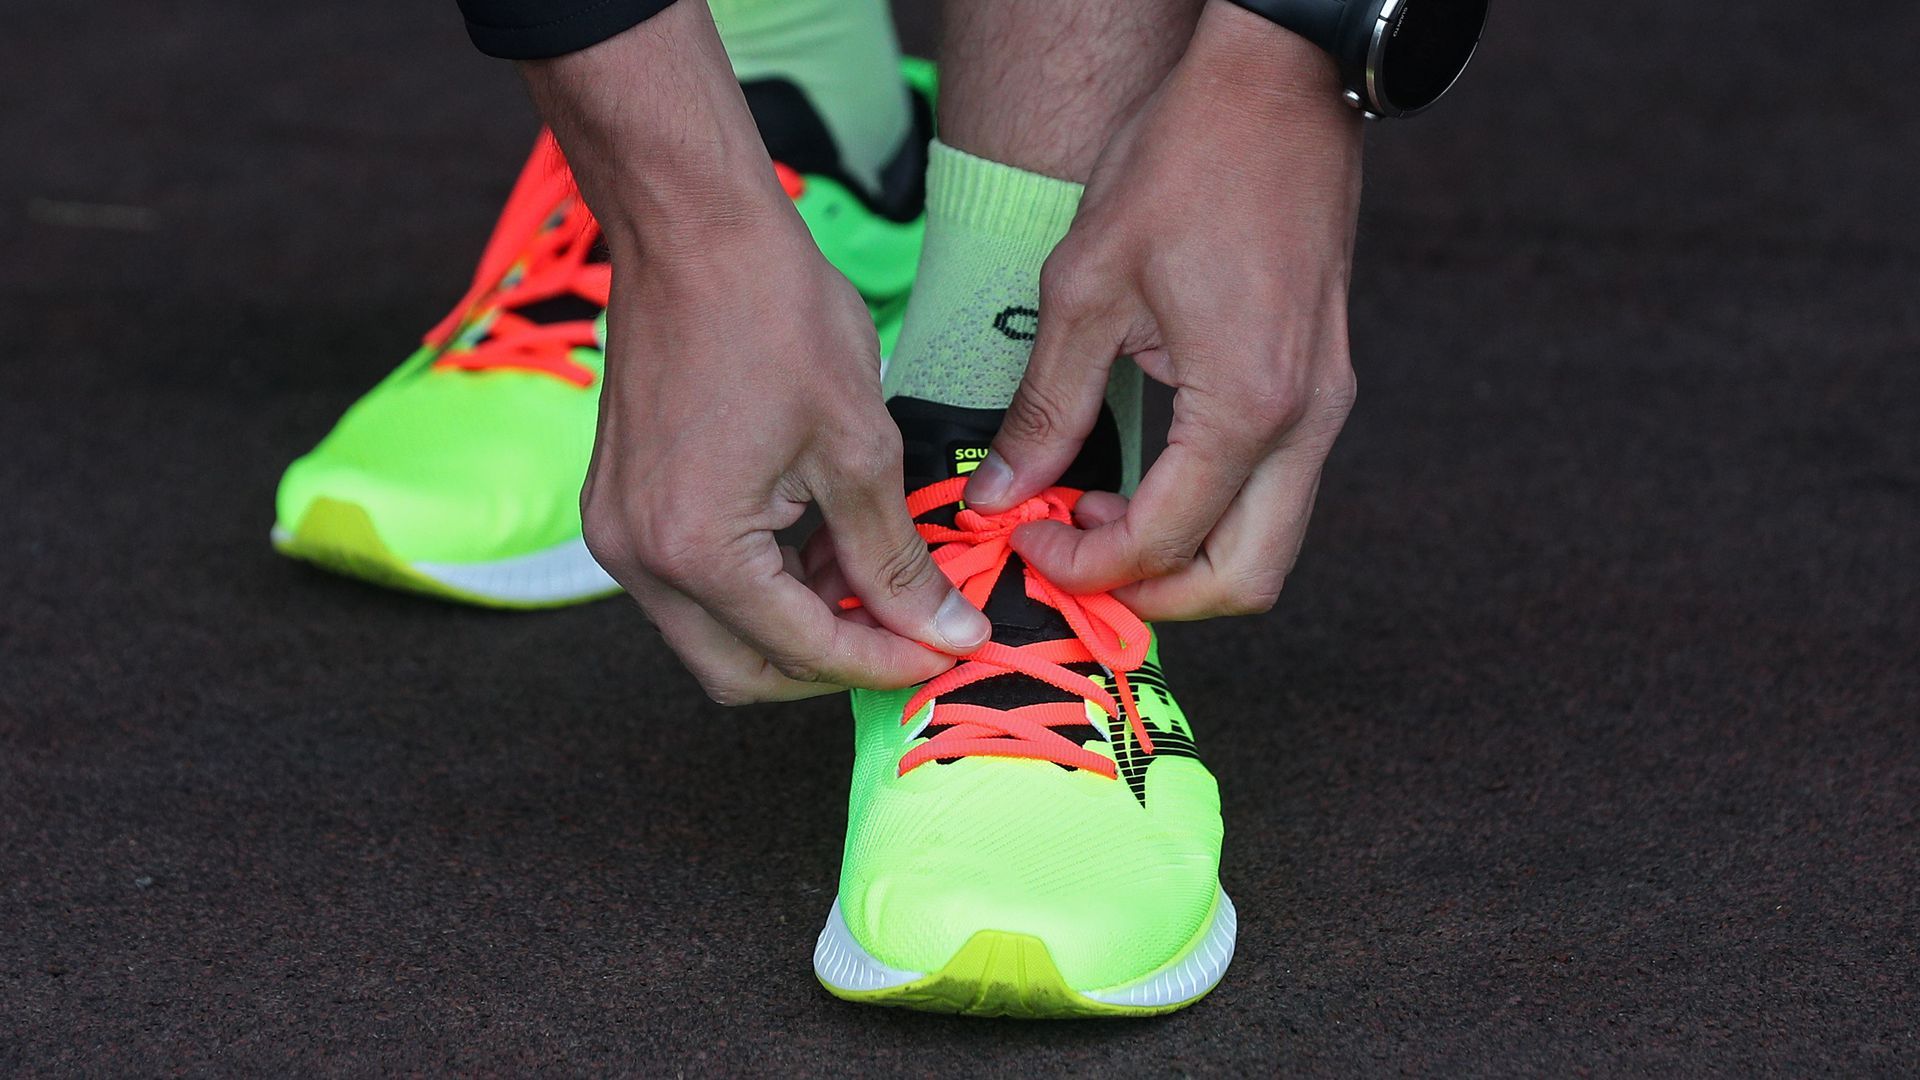 A man's hands lace up neon yellow running sneakers.